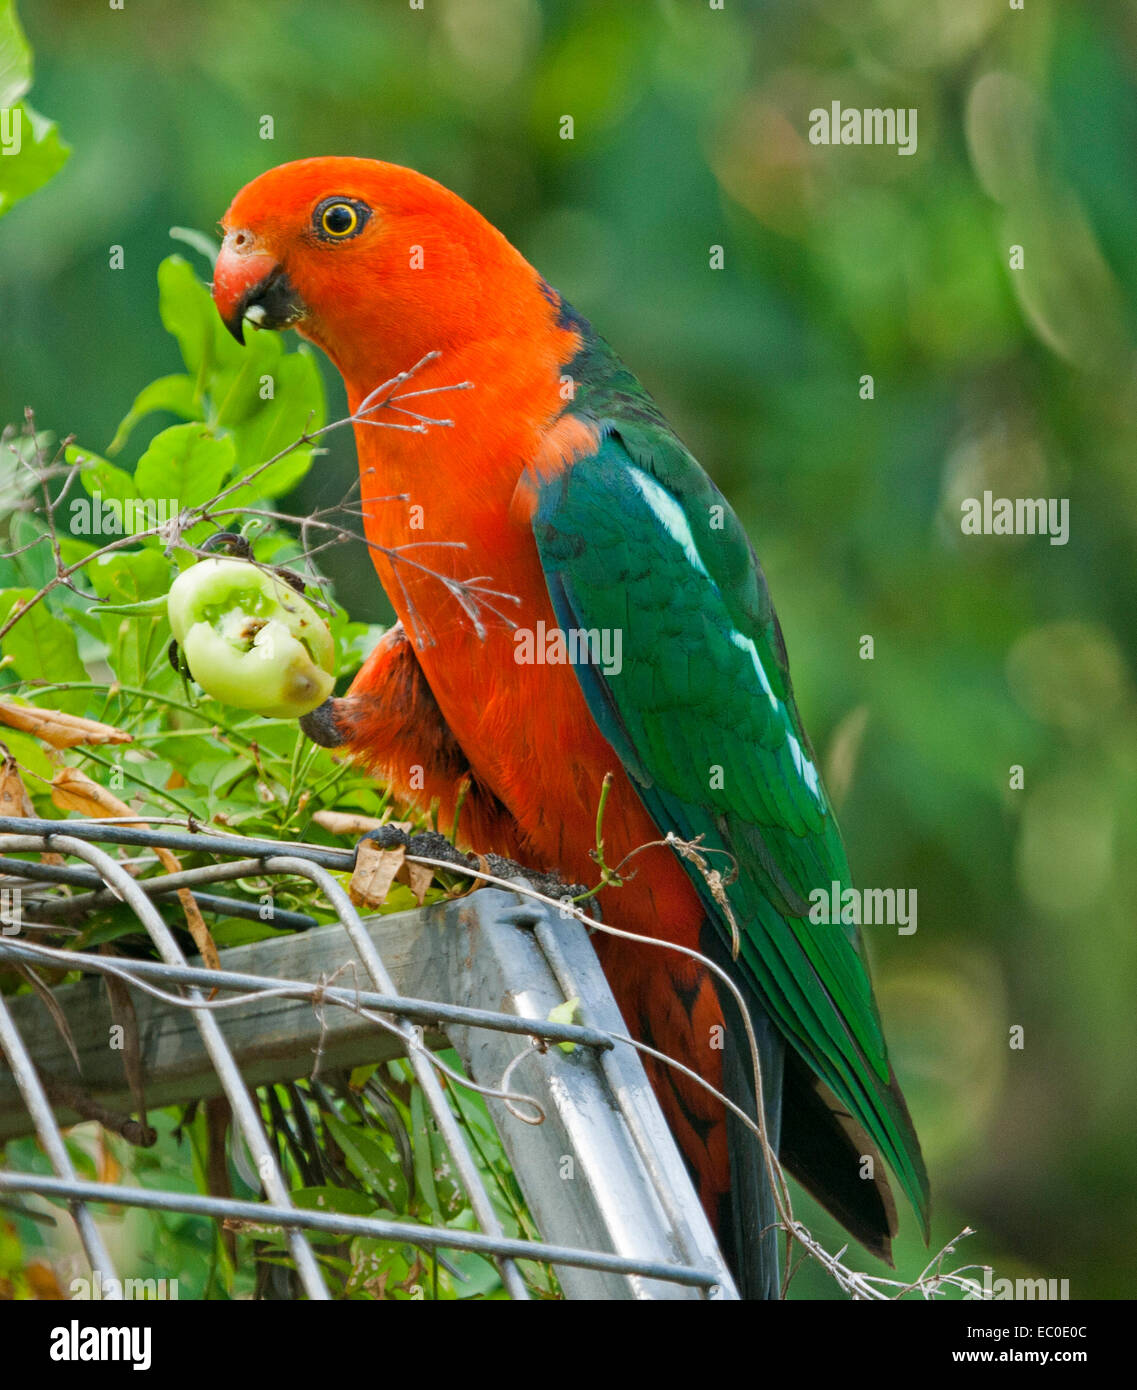 Spectacular vivid red & green Australian male king parrot, a wild bird, eating green tomato held in raised claw in home garden Stock Photo